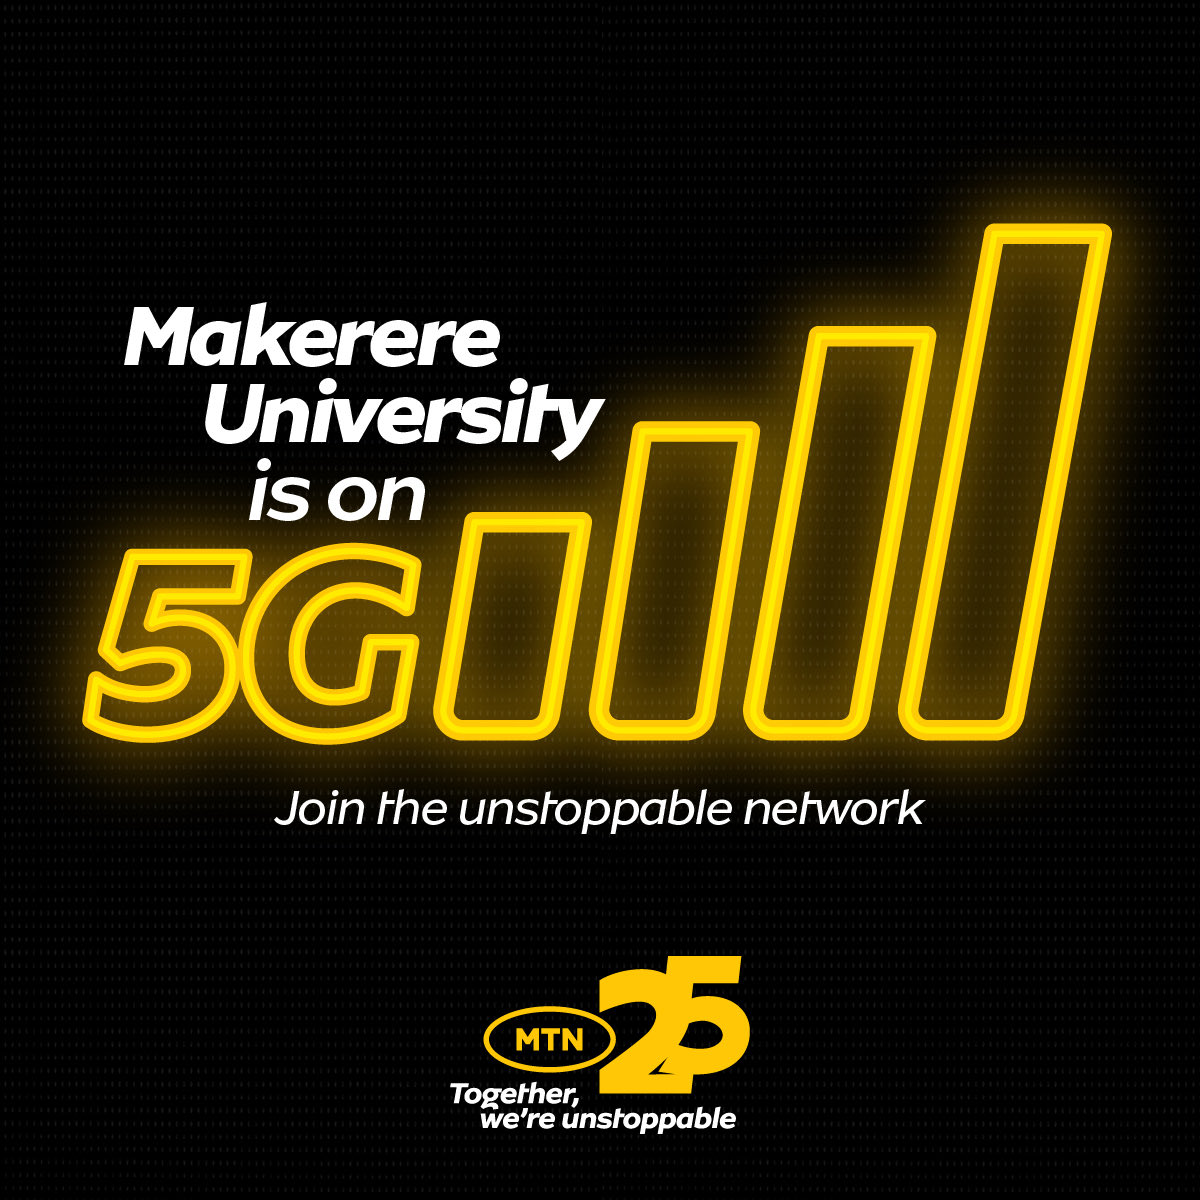 Hello Makererians 😁
Makerere University is on #MTN5G now.
Research made so easy for you all
#UnstoppableNetwork today. #TogetherWeAreUnstoppable